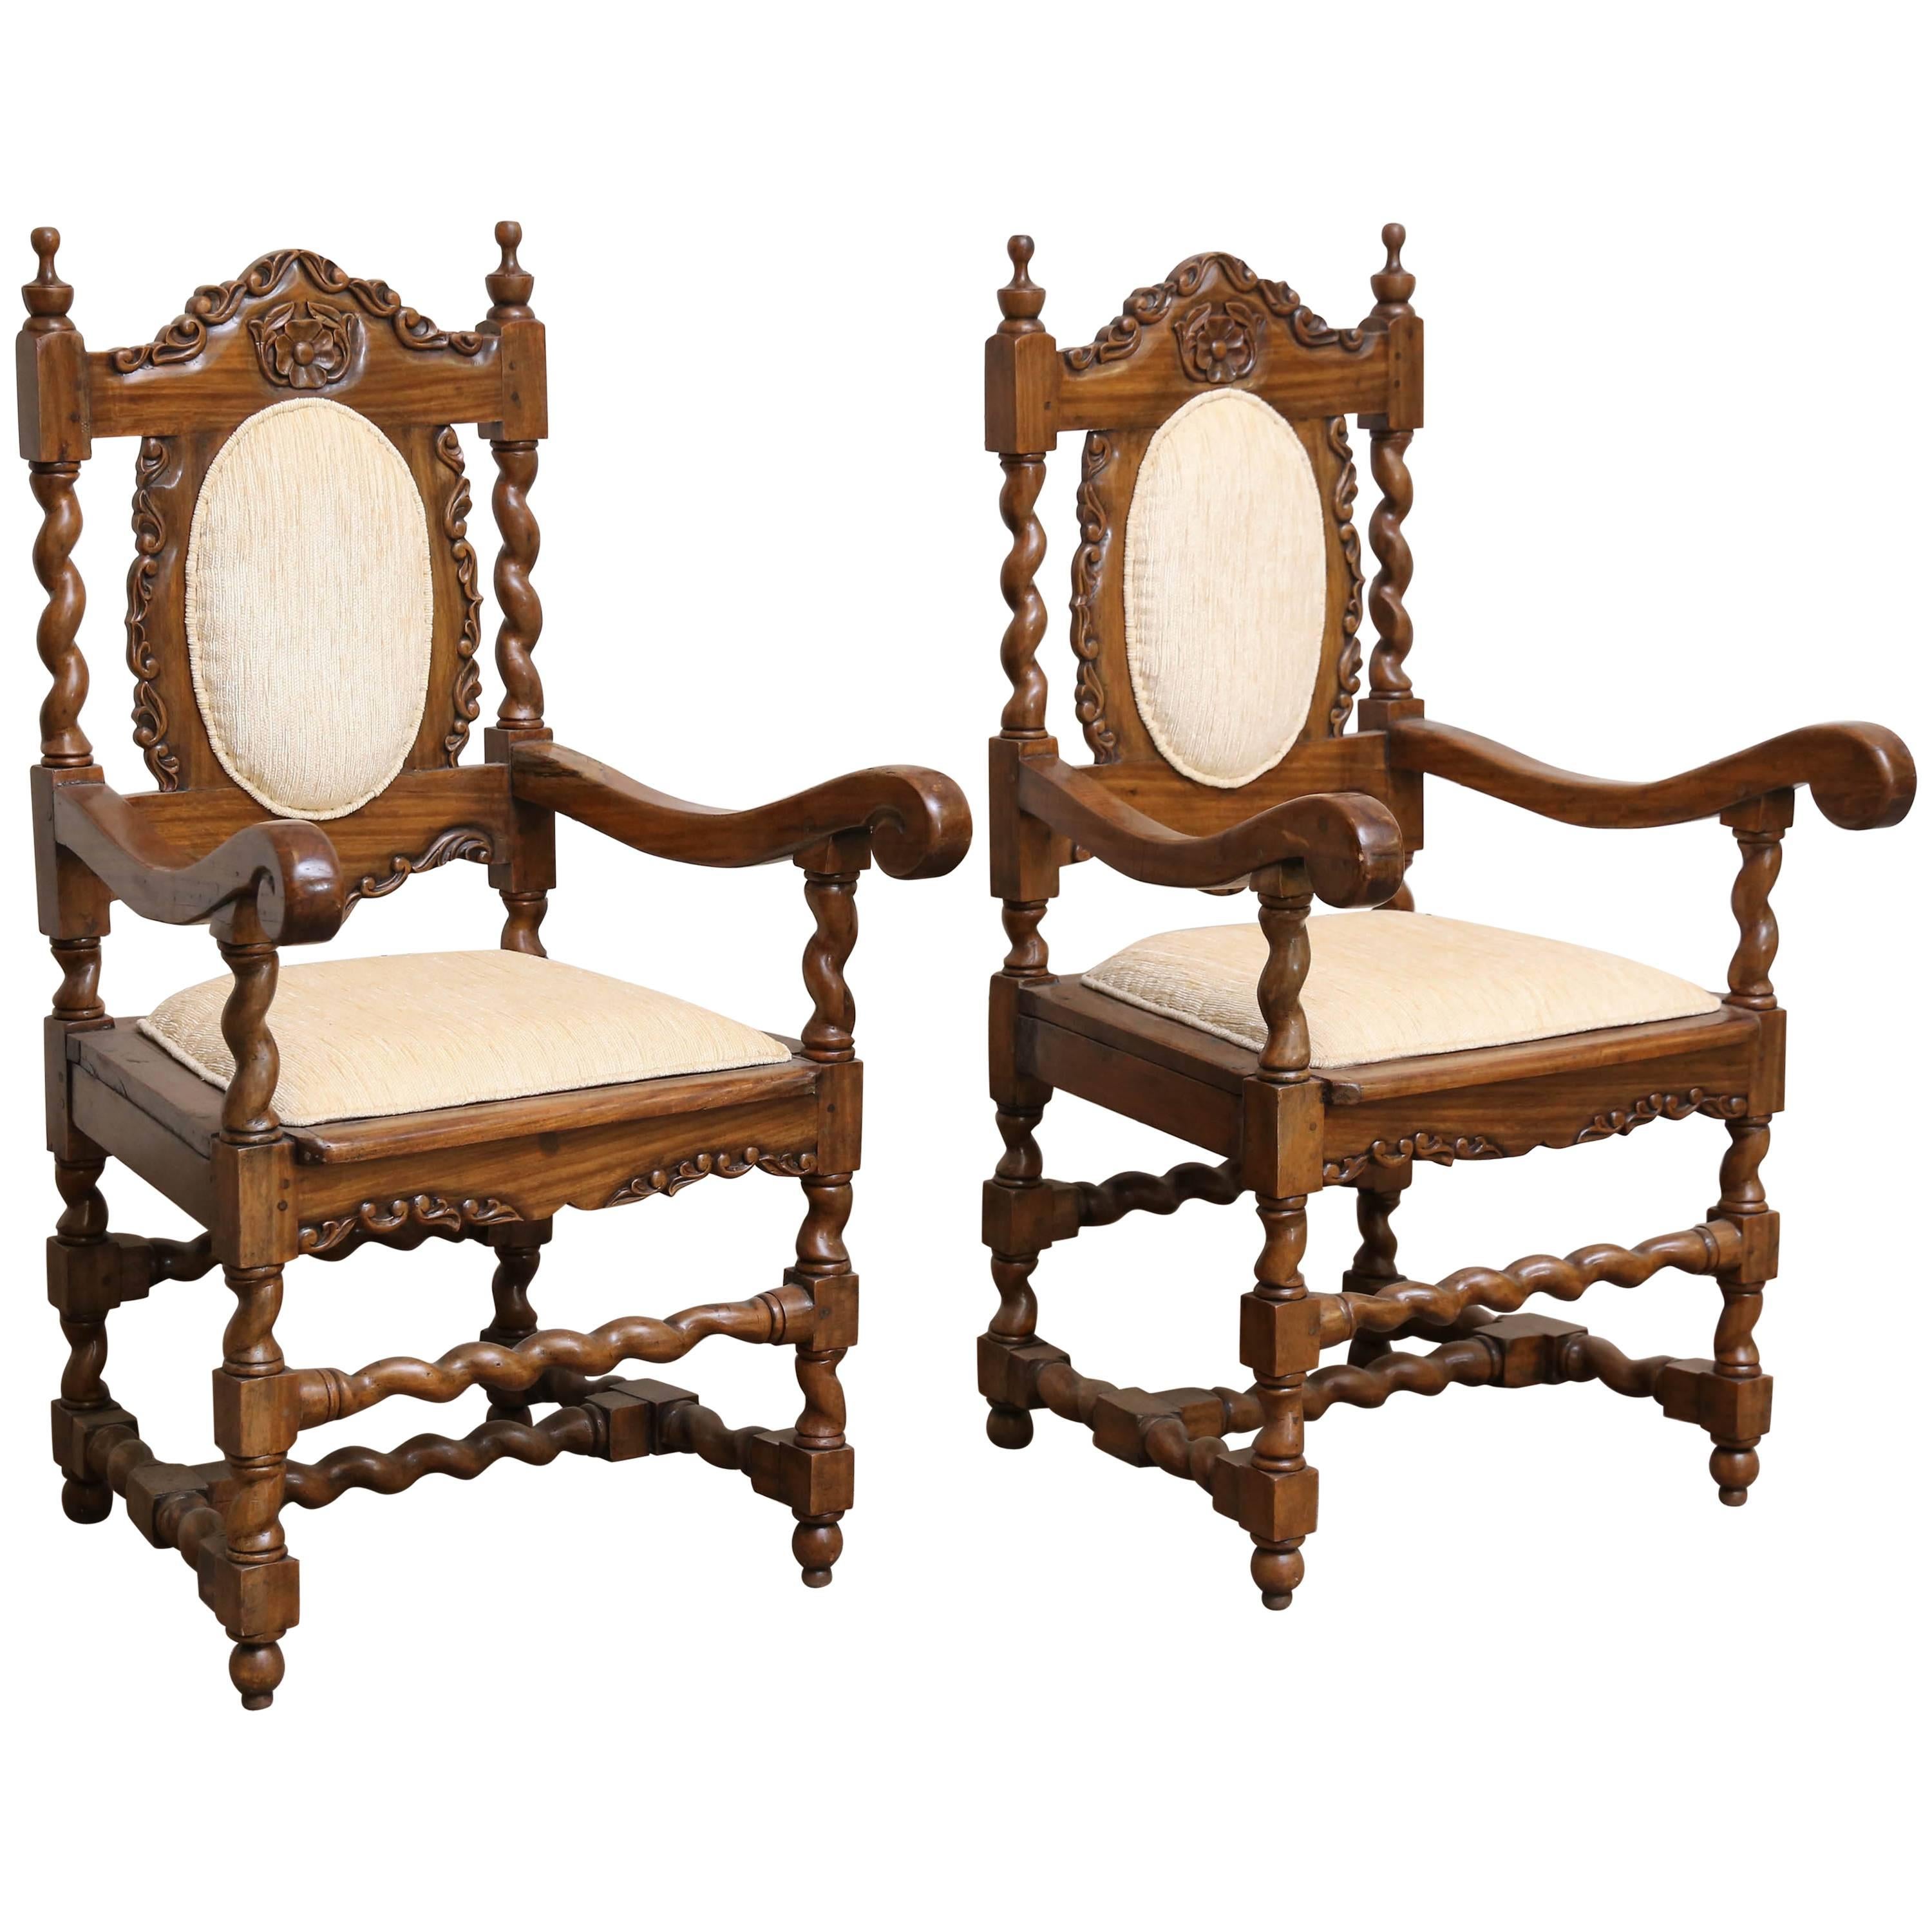 Pair of 1850s Solid Satinwood Armchairs from Galle District of Sri Lanka For Sale